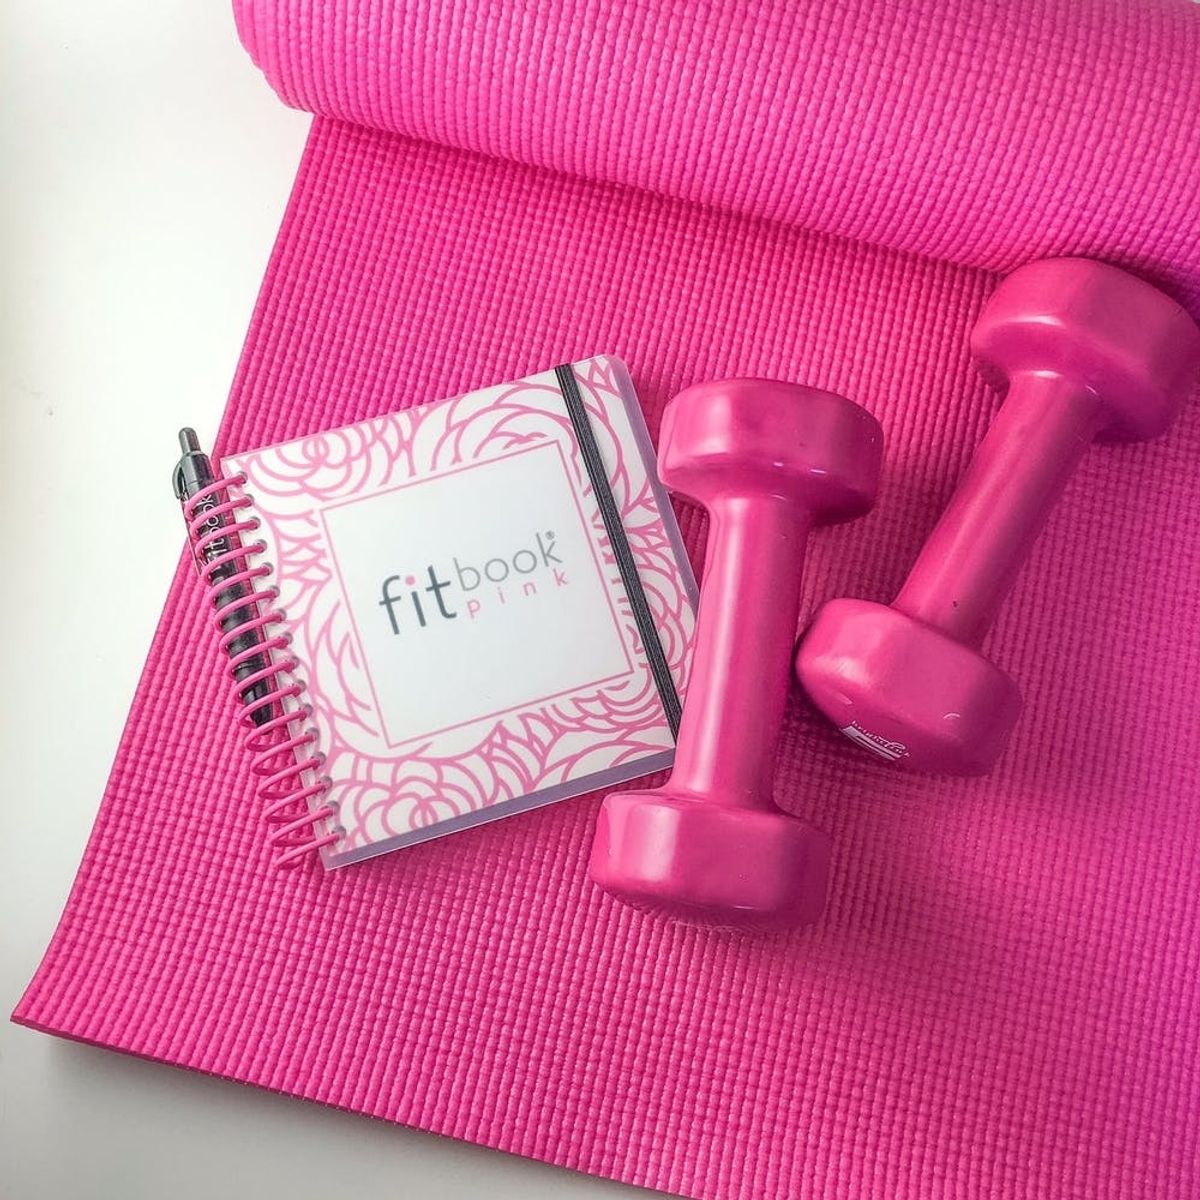 Fitness Gear That Rocks in the Gym and Helps Fight Breast Cancer